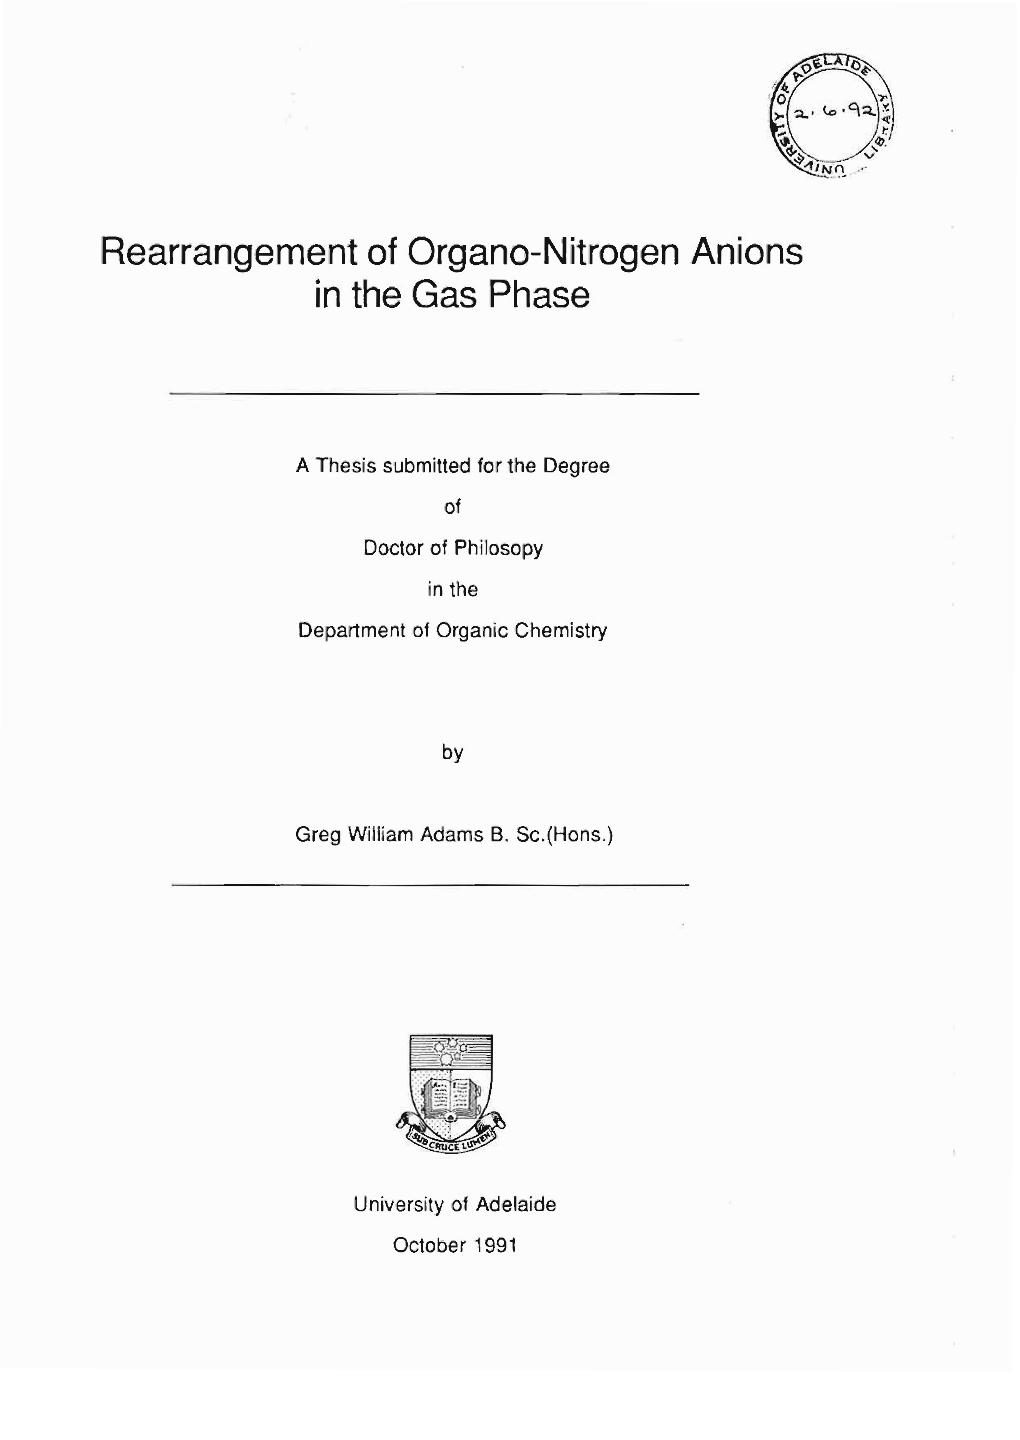 Rearrangement of Organo-Nitrogen Anions in the Gas Phase